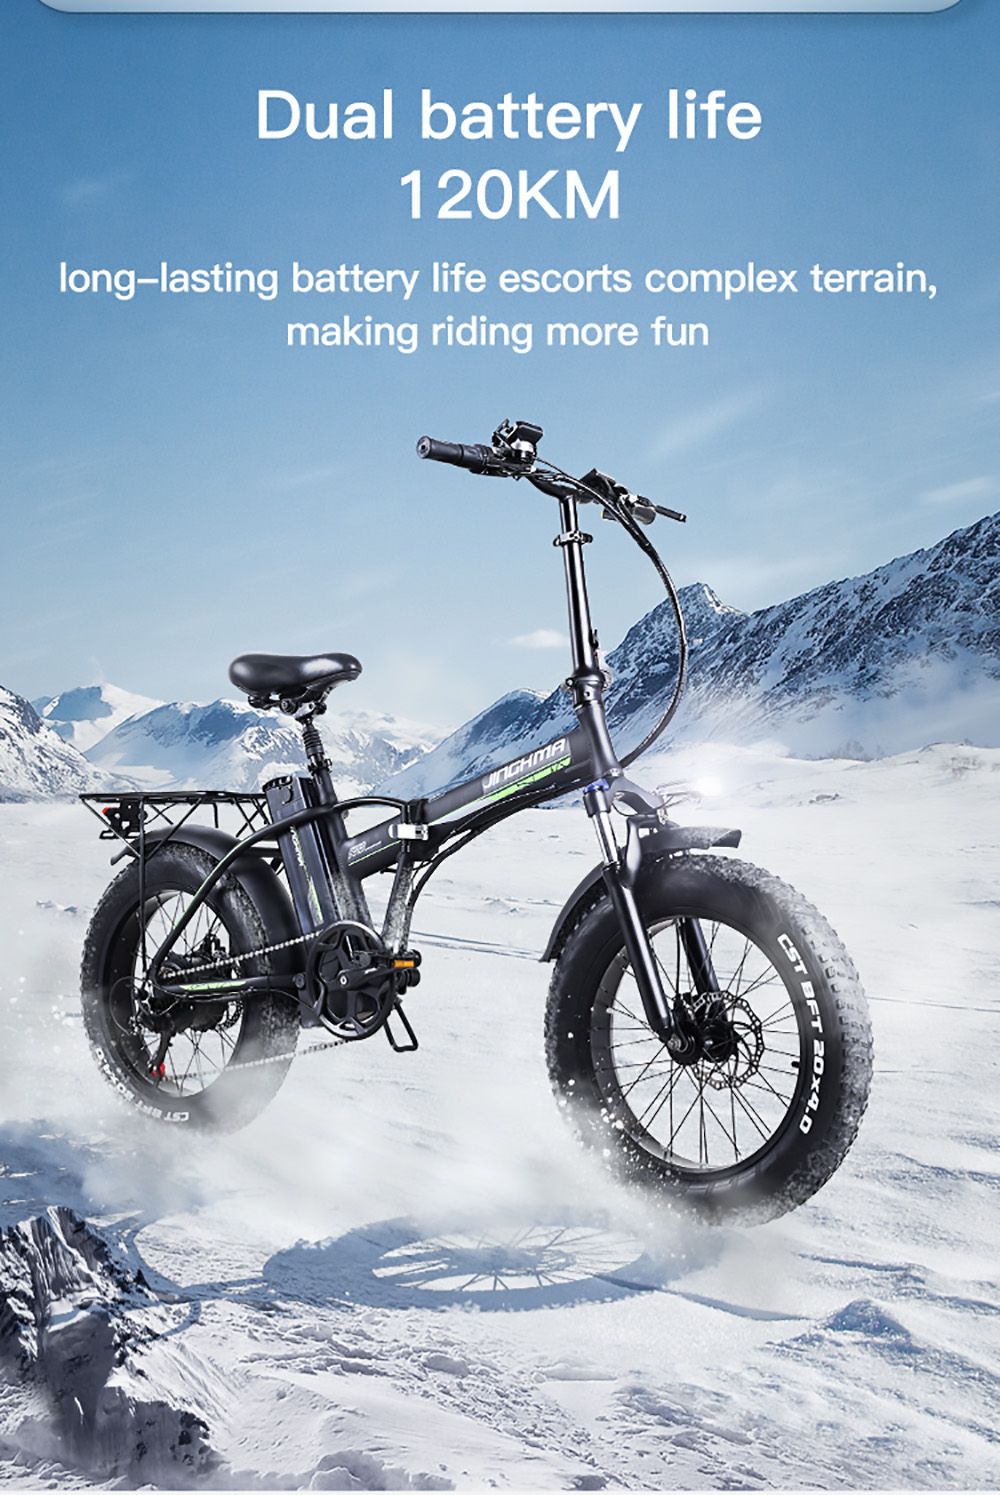 JINGHMA R8 500W 48V 15Ah 20 Inch Tire Electric Bicycle 40km/h Max Speed ​​90km Range 120kg Max Load